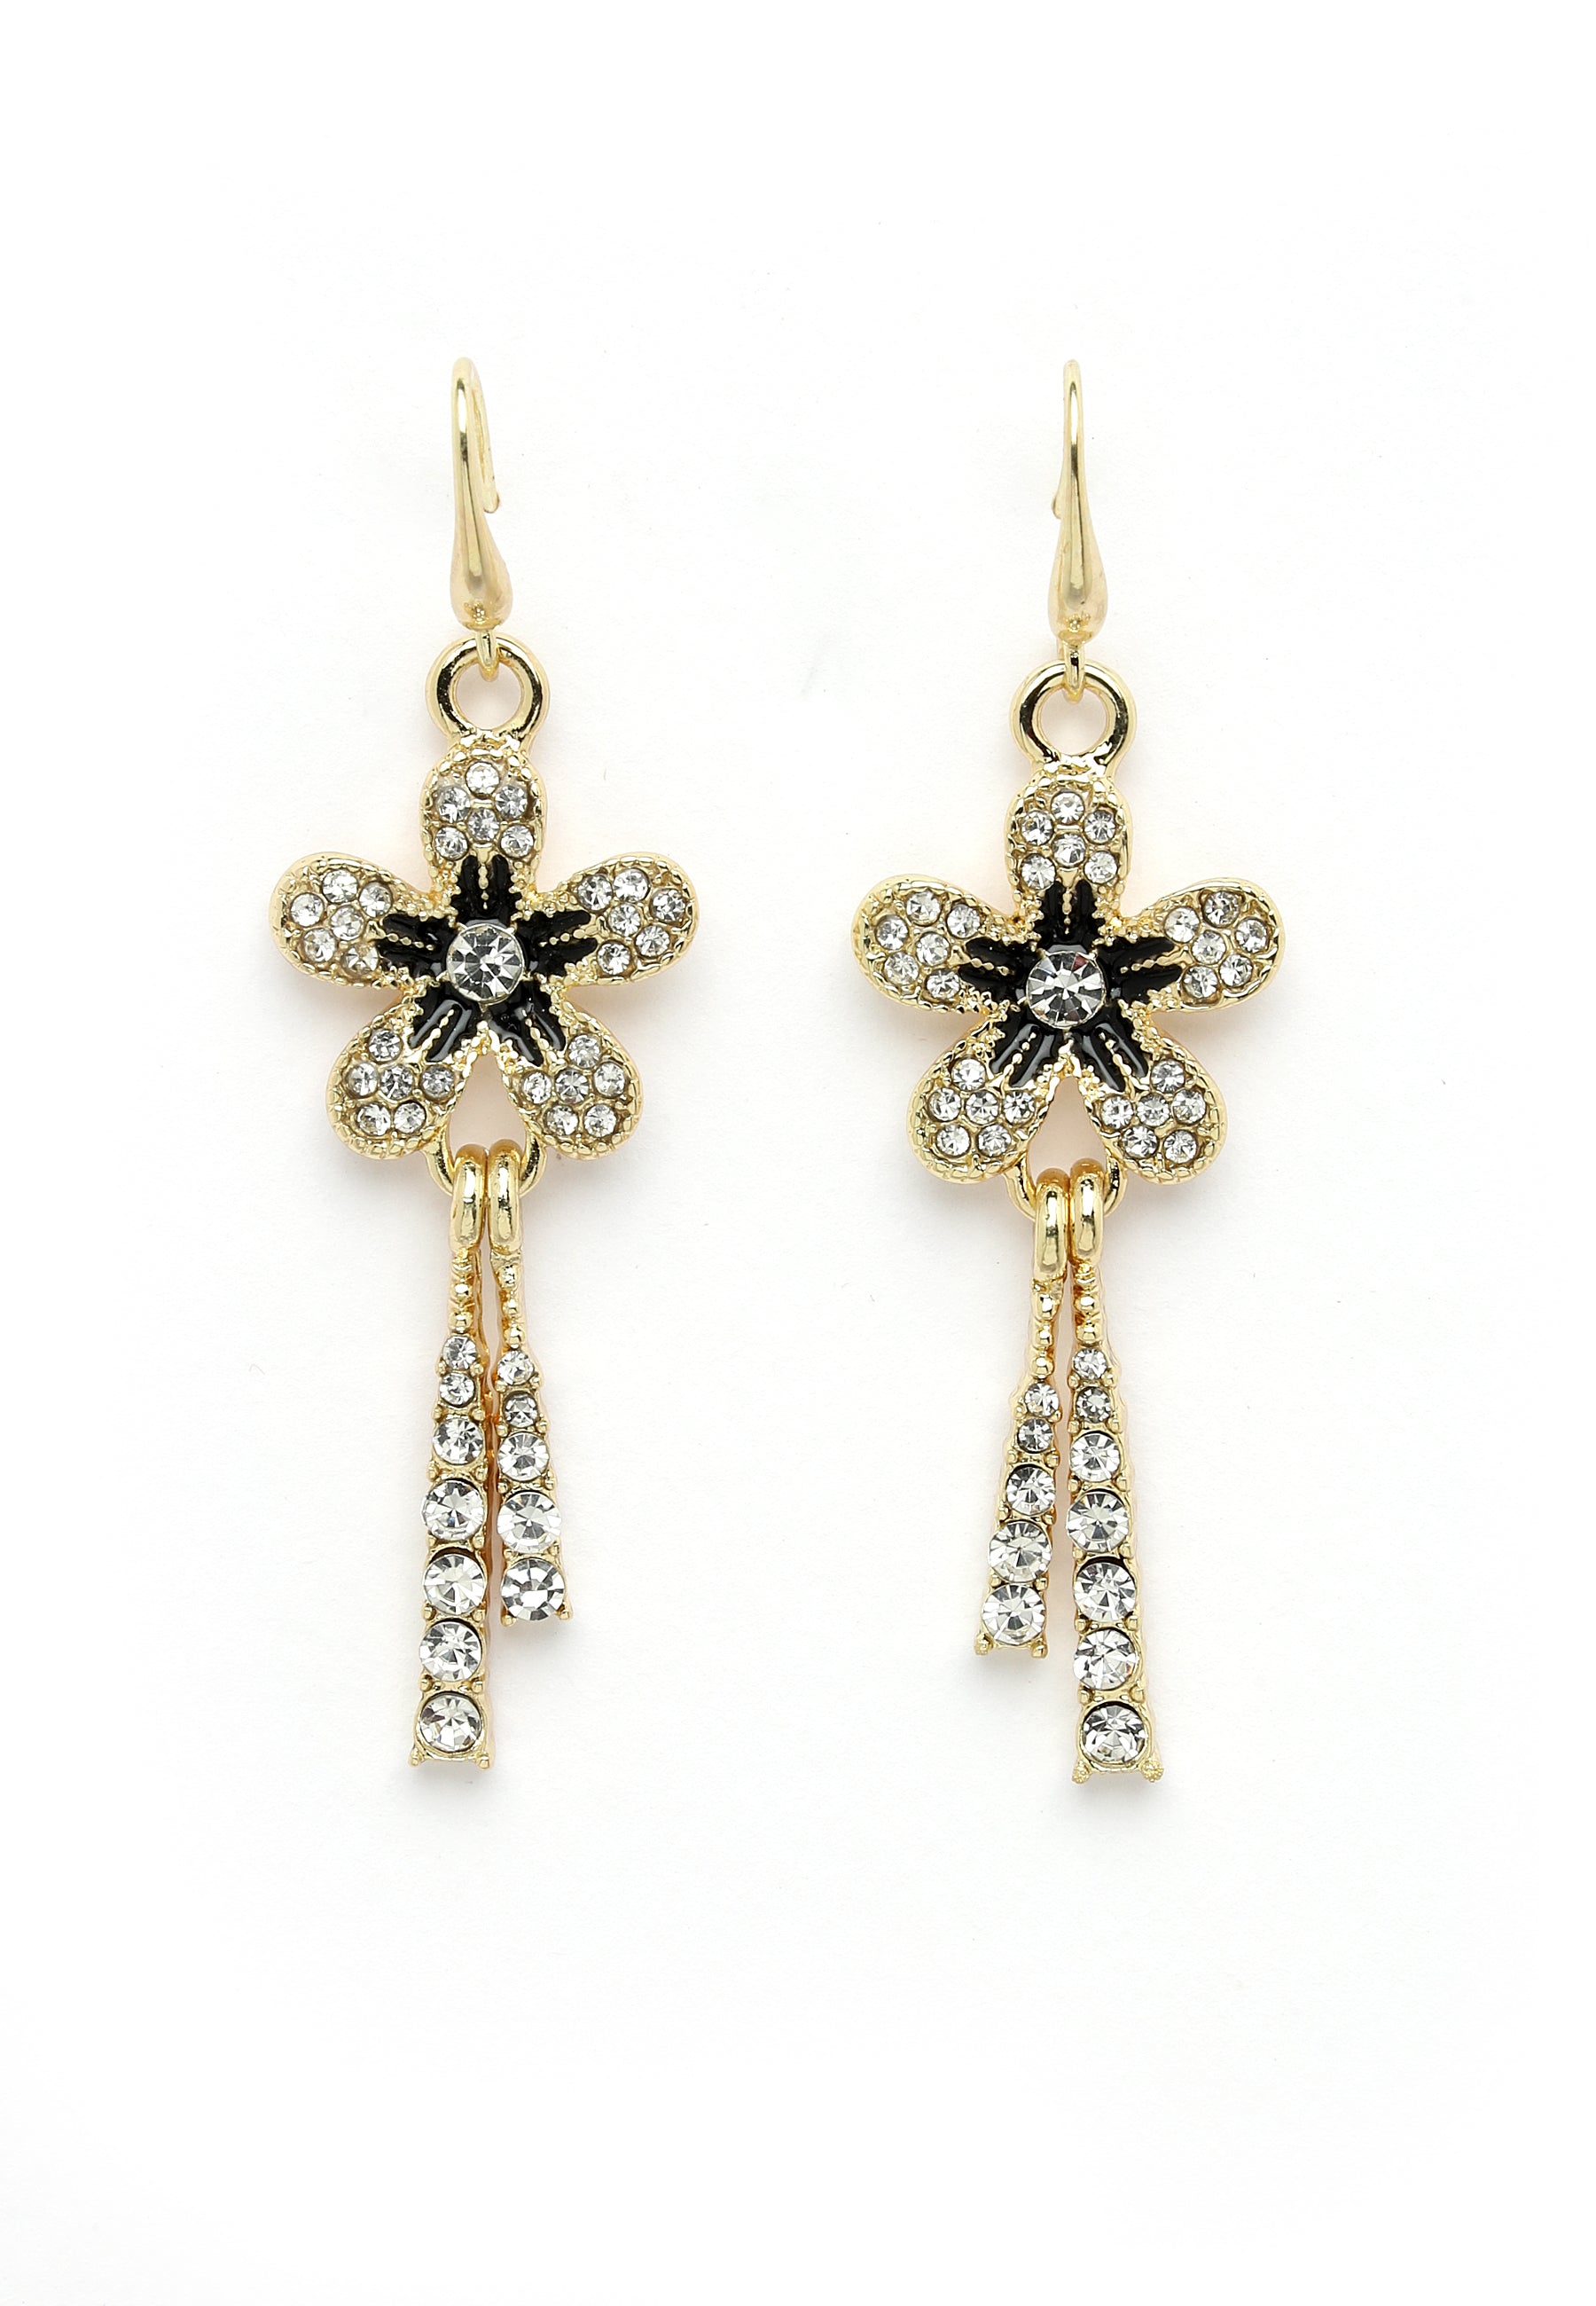 Avant-Garde Paris Gold-Colored Crystal Floral Chimes Earrings